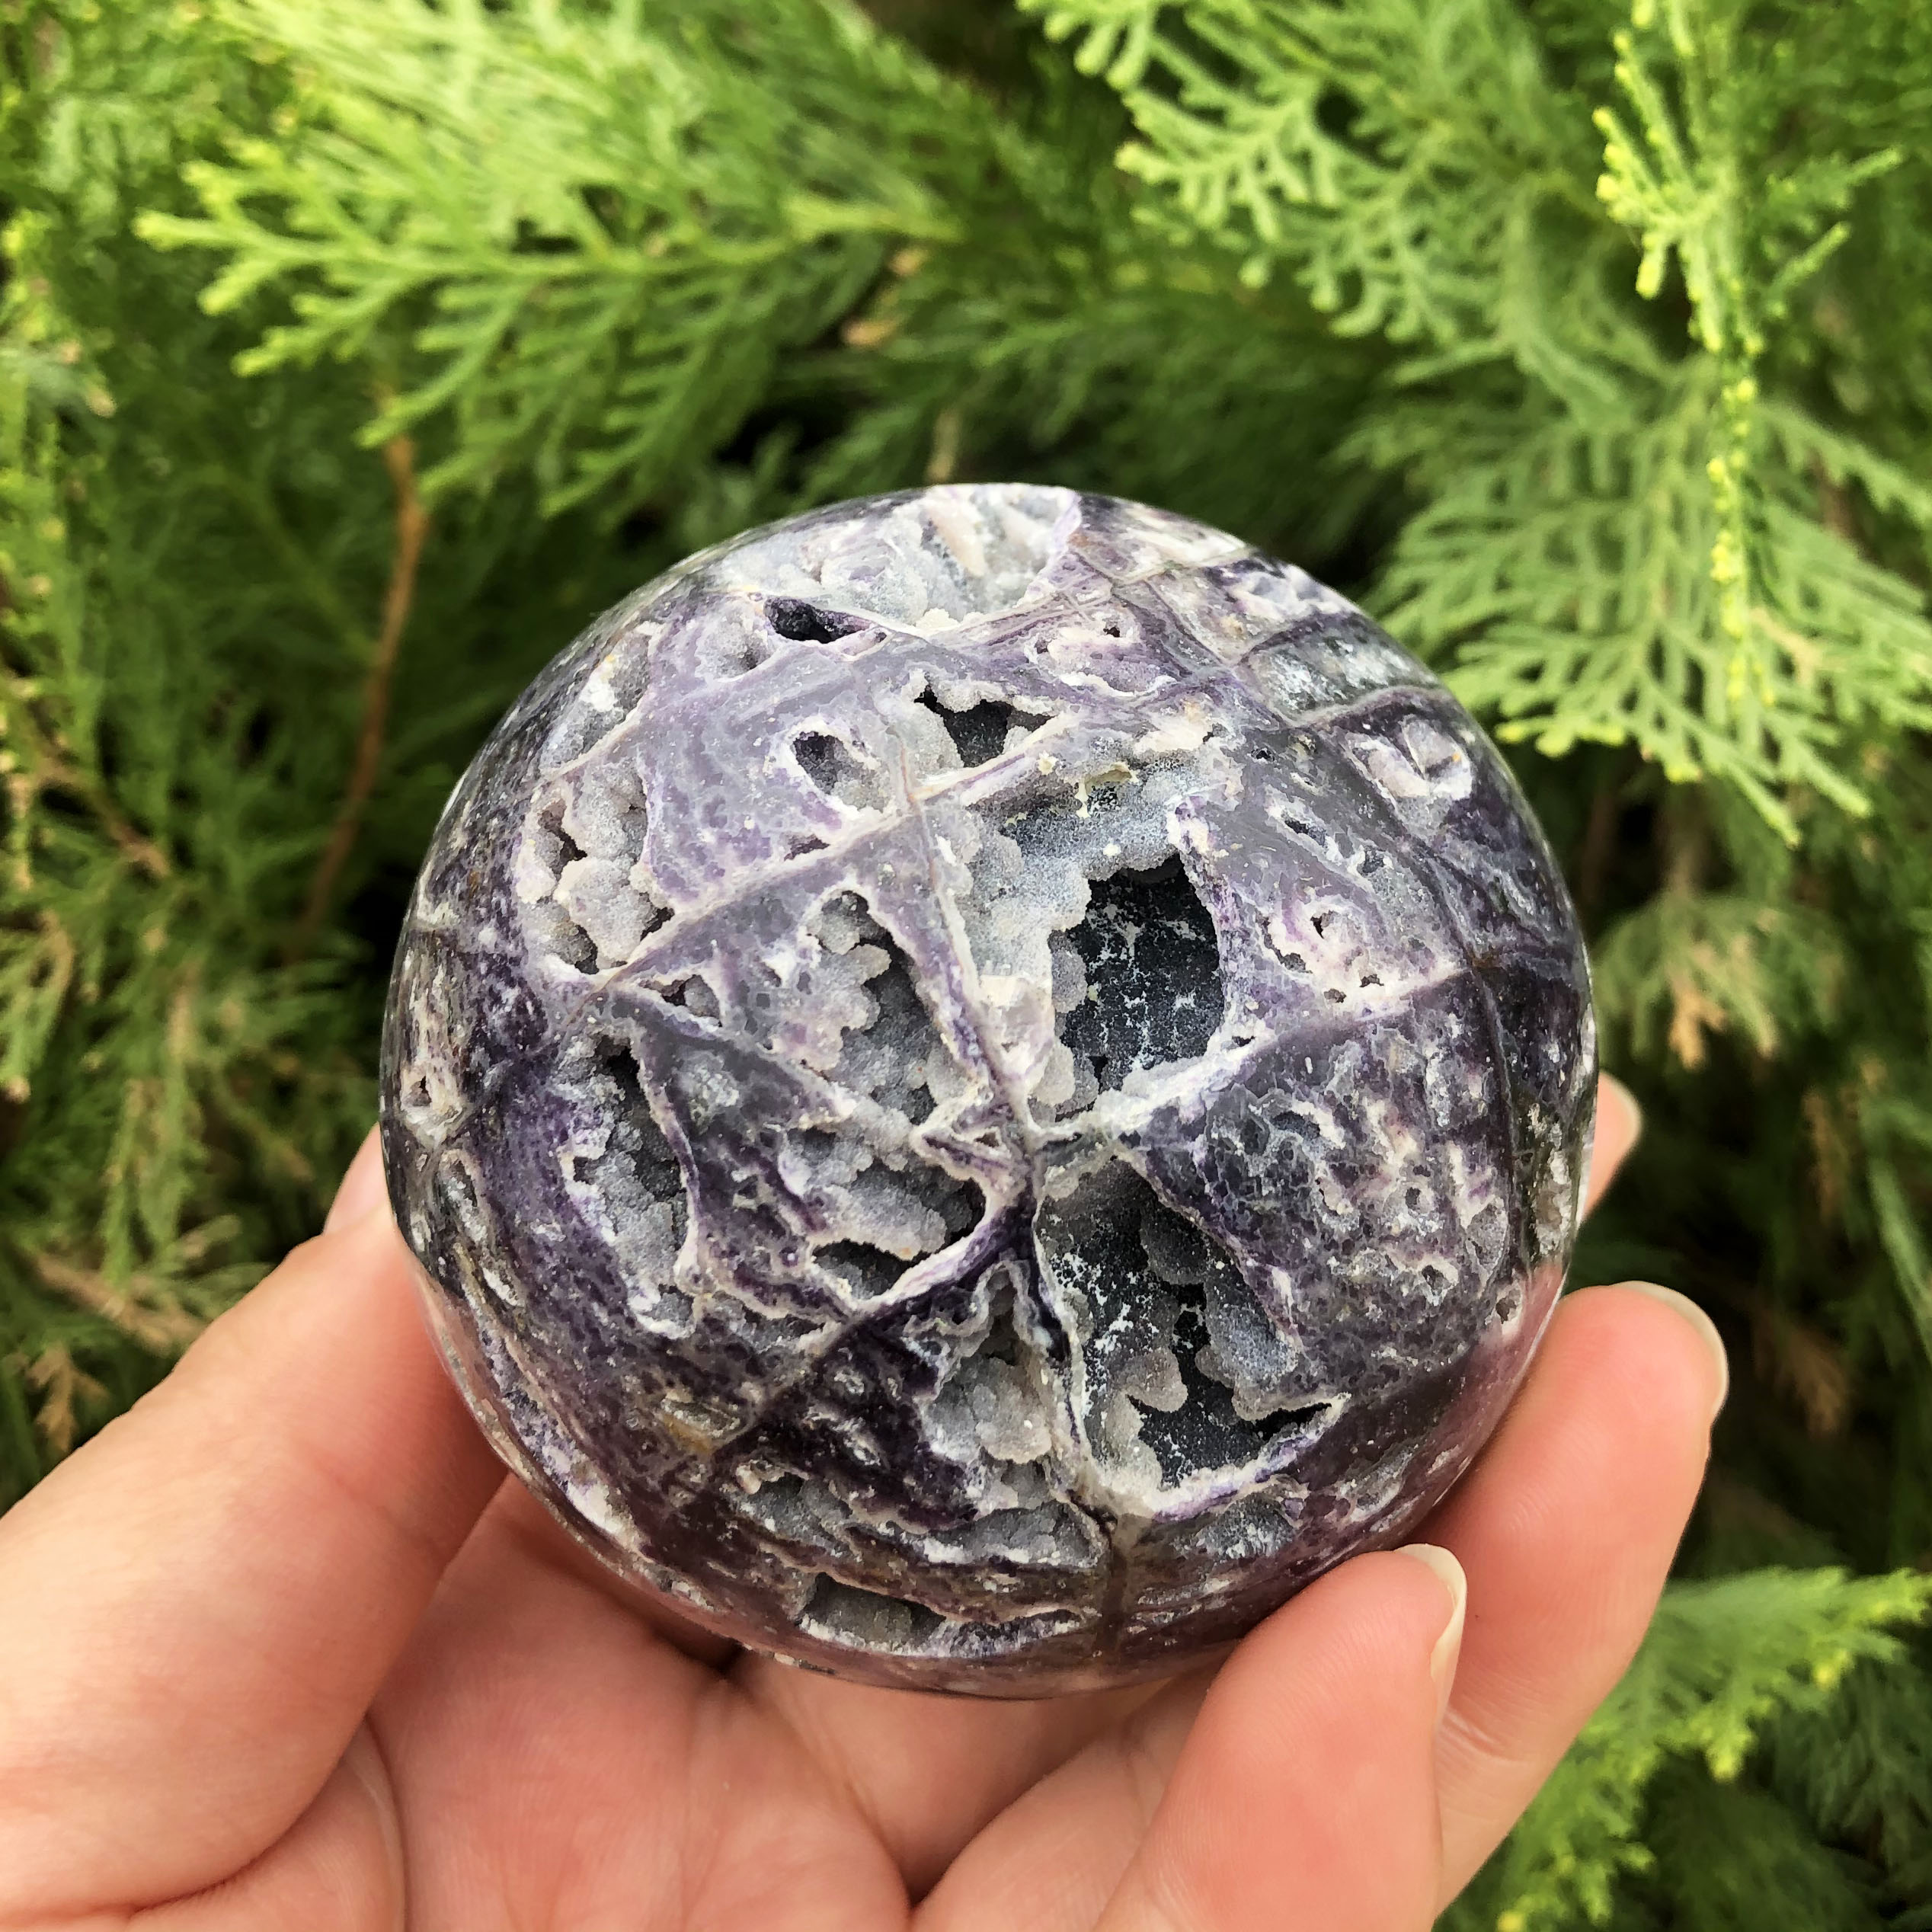 1Pcs Natural High Quality Sphalerite Ball Healing Rare Crystal Stone Sphere For Home Decoration